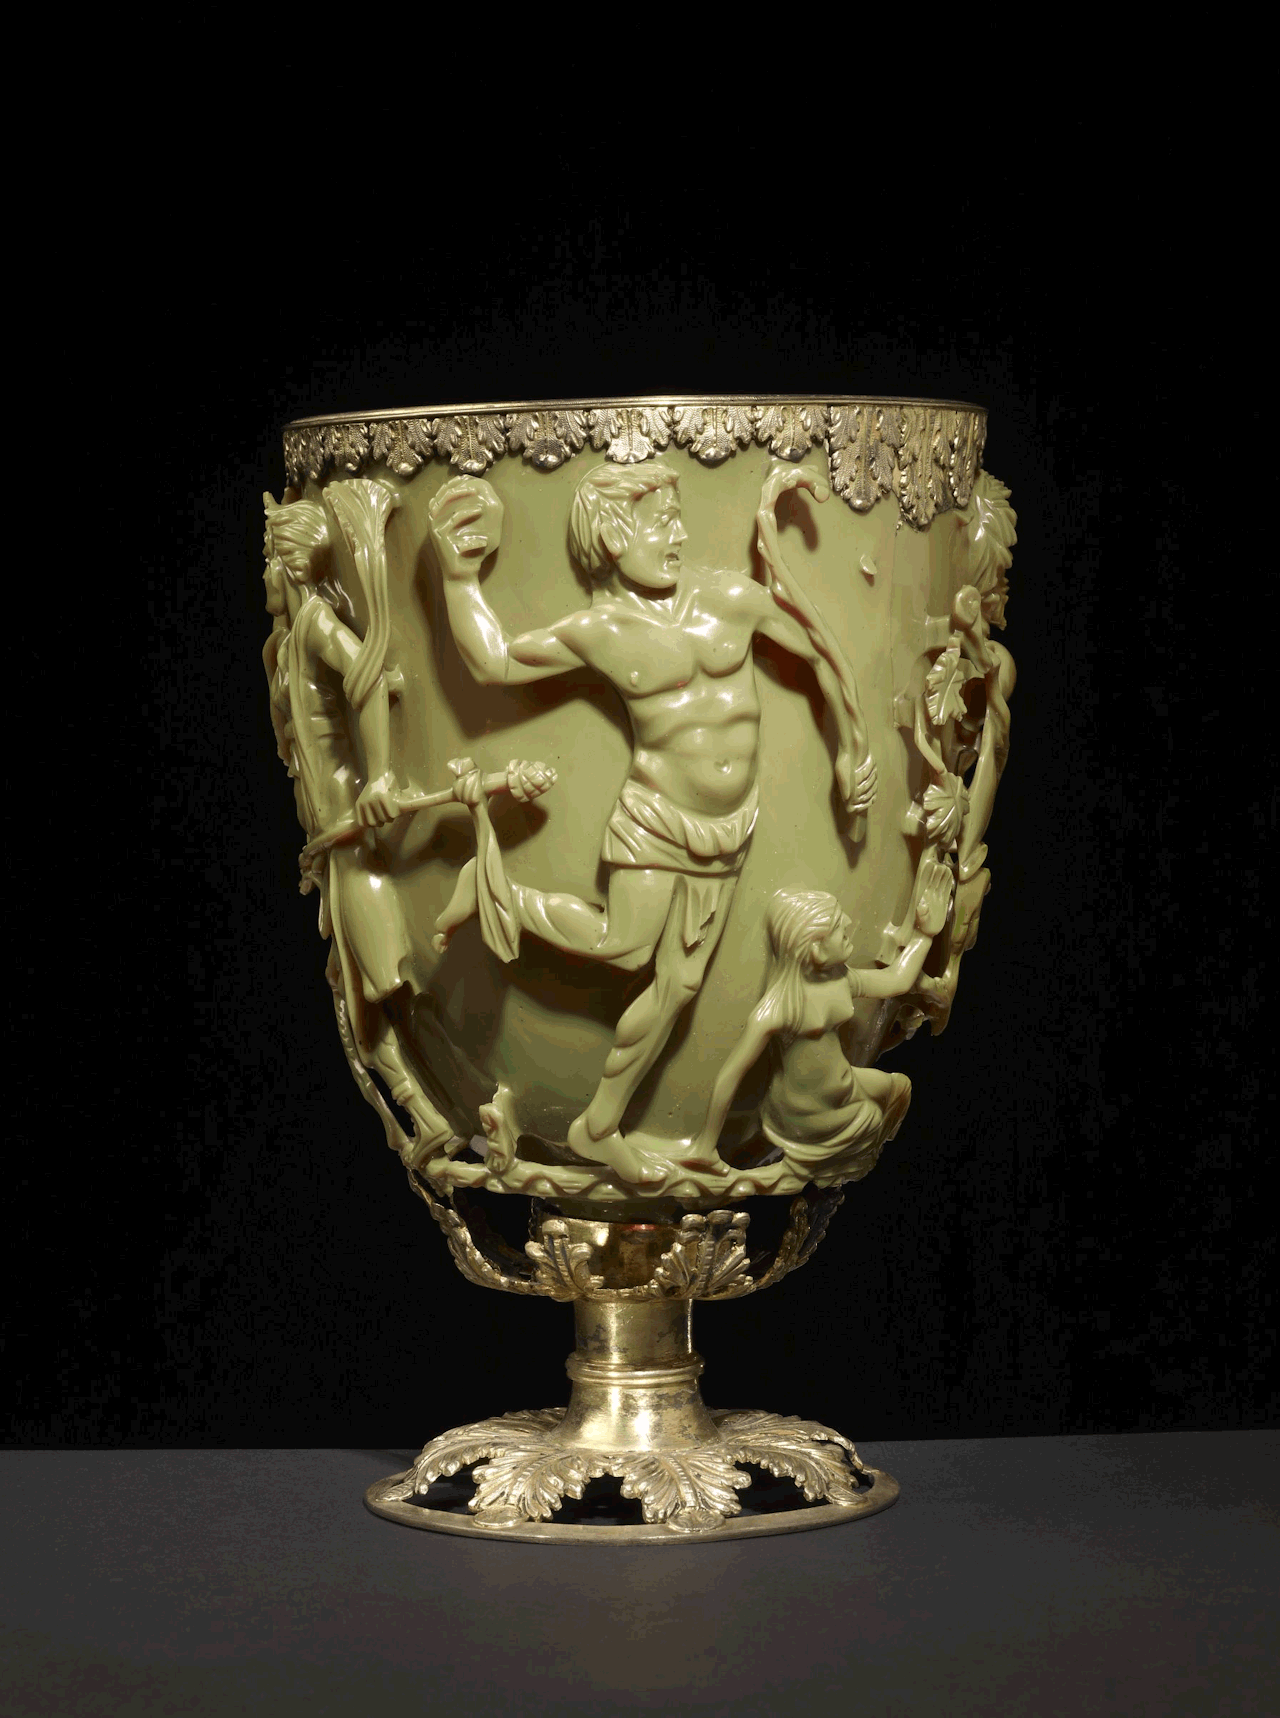 Roman Lycurgus Cup is a 1,600-year-old jade green Roman chalice. When you put a source of the light inside it it magically changes colour. It appears jade green when lit from the front but blood-red when lit from behind or inside.